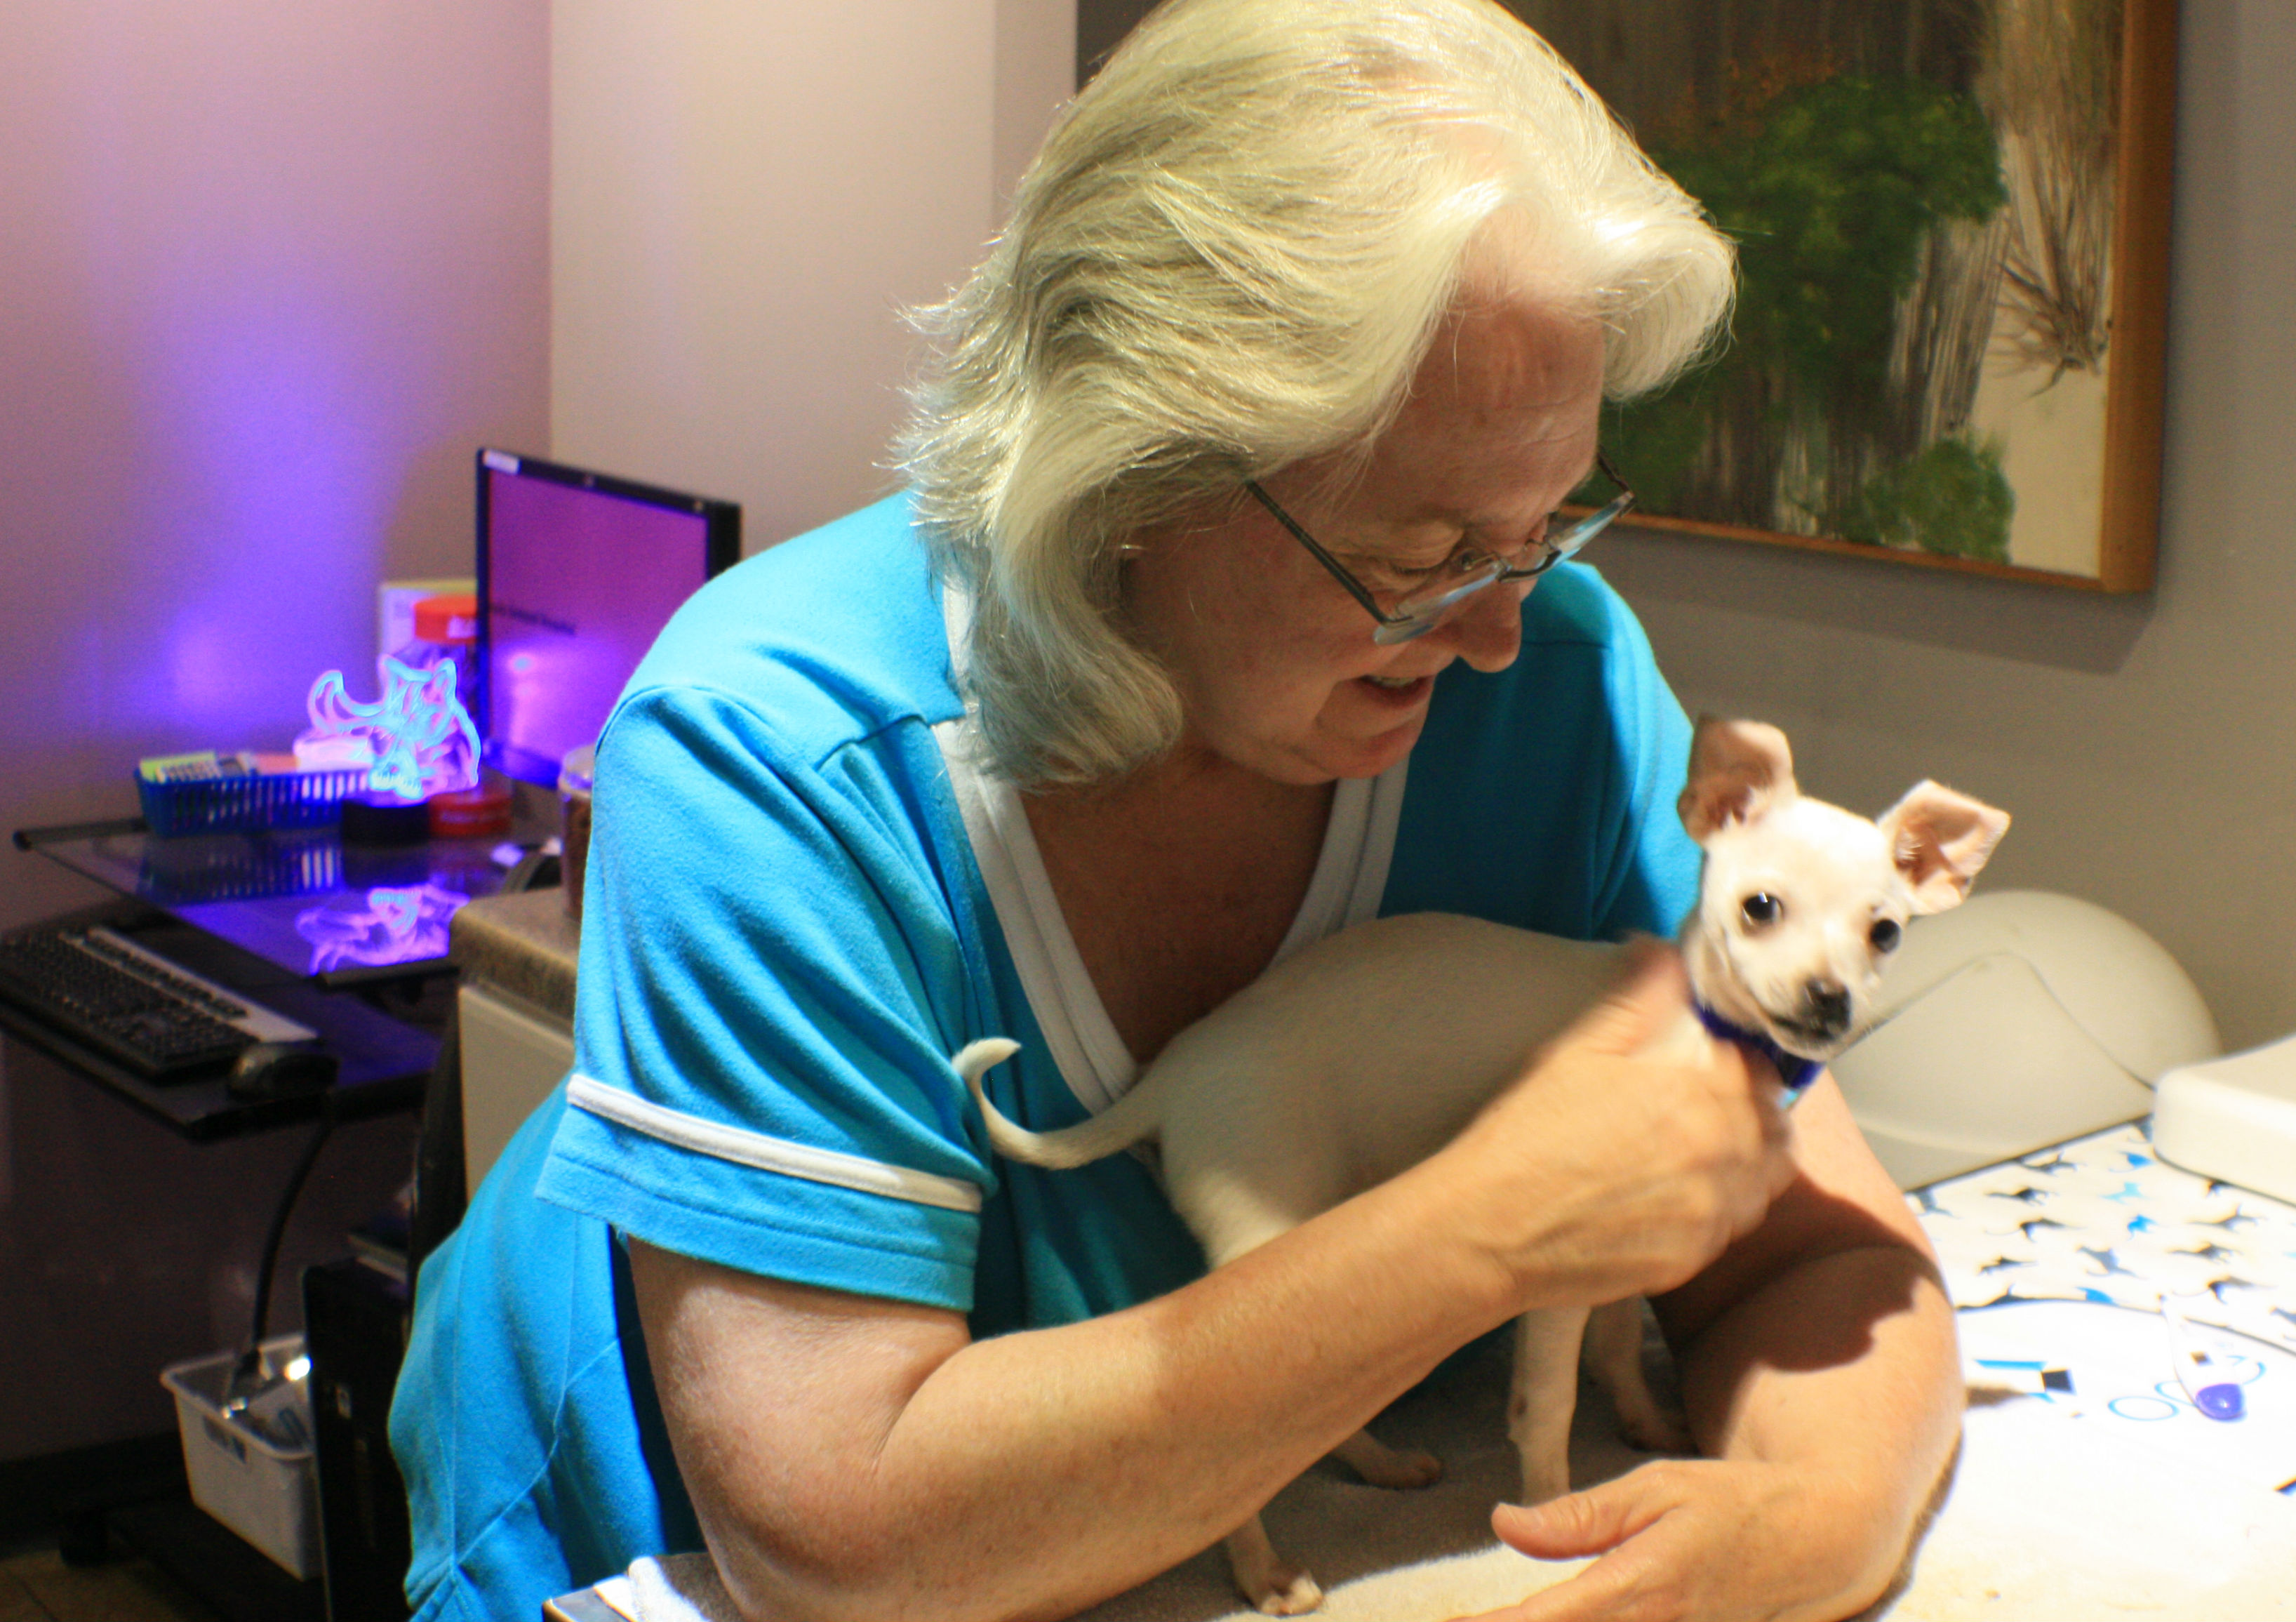 Cotton, rescued by Real Good Dog Rescue, waits with volunteer Dena Mandino to formulate a treatment plan with Dr. Clay after a positive Parvo test. Once he has a clean bill of health, he'll be eligible for adoption. (Cole Bradley)